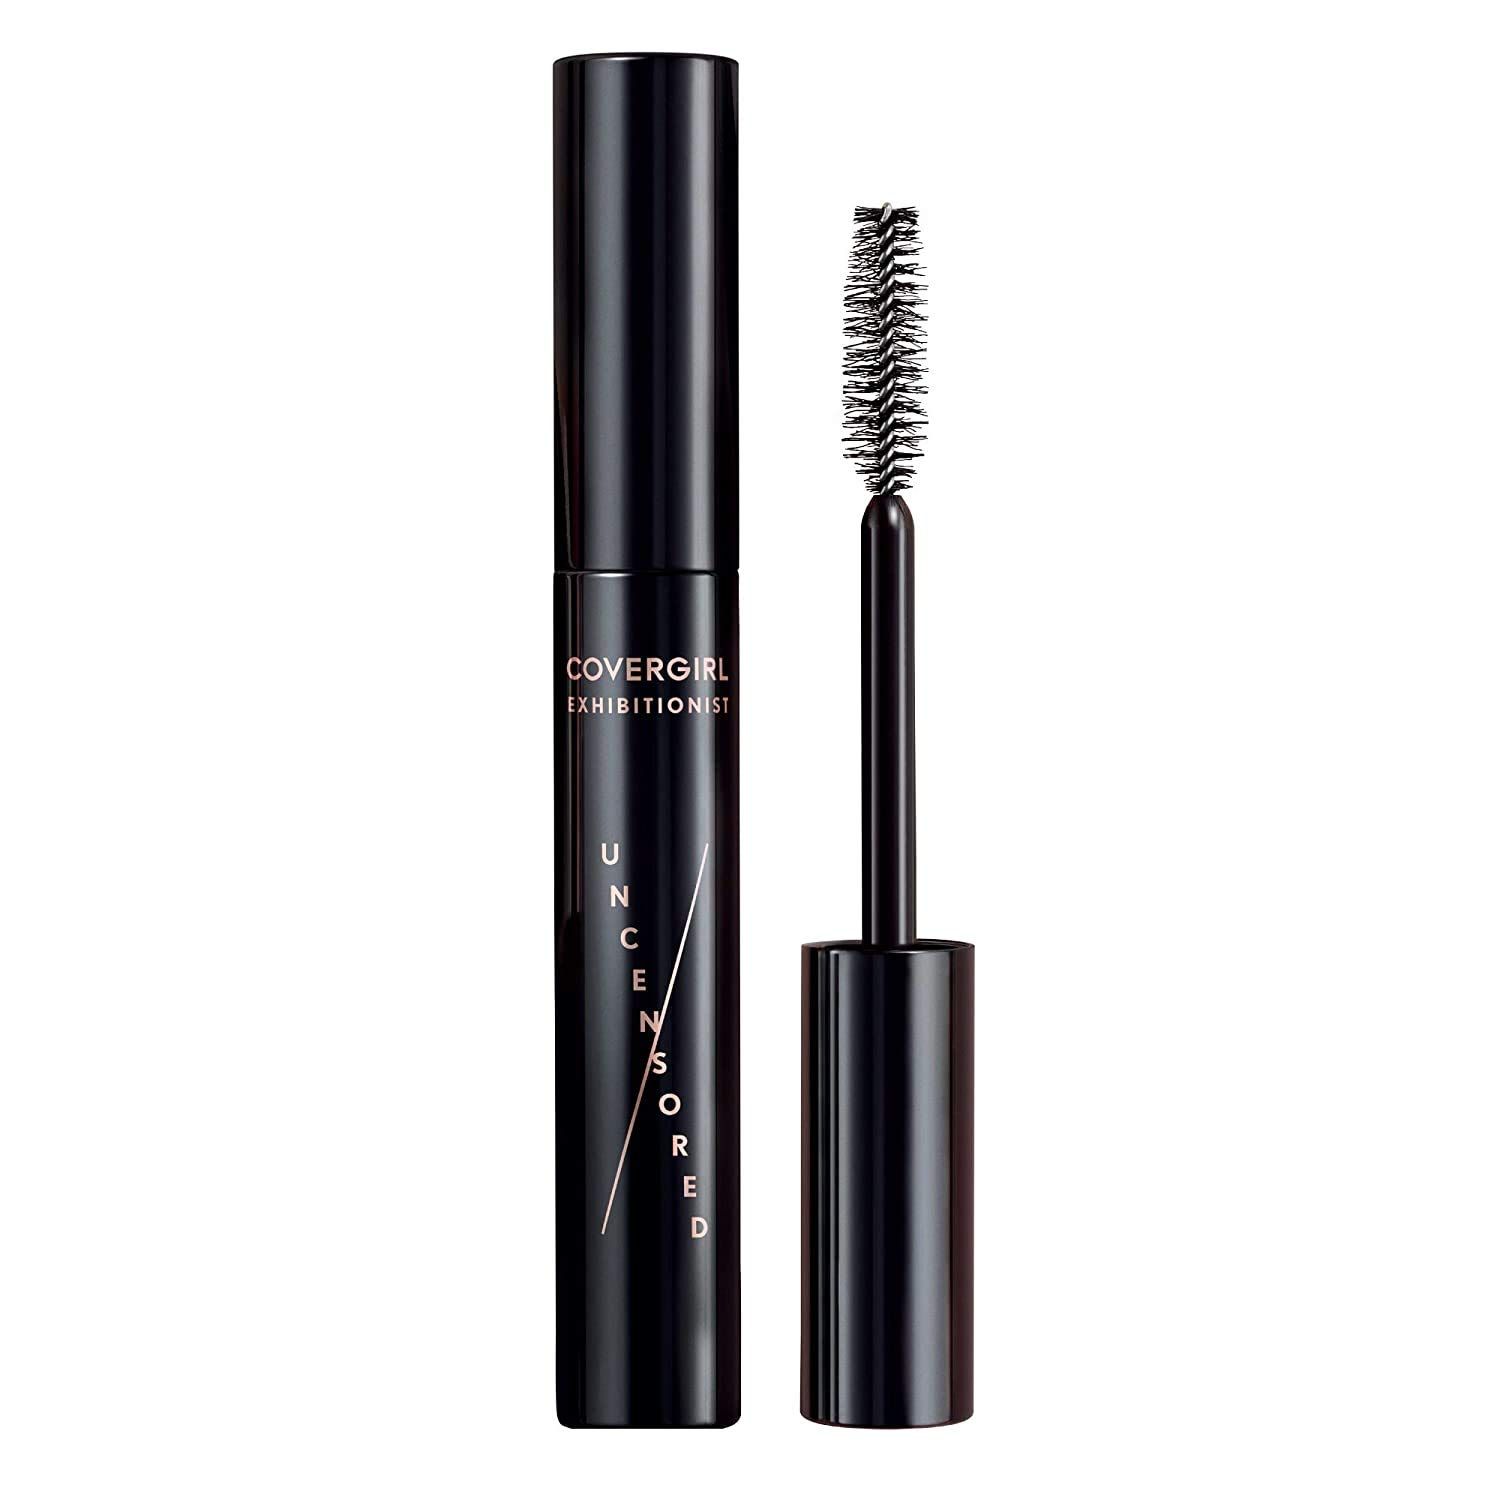 COVERGIRL Exhibitionist Uncensored Mascara for Volume and Length, Extreme Black, 0.3 Fl Oz | Amazon (US)